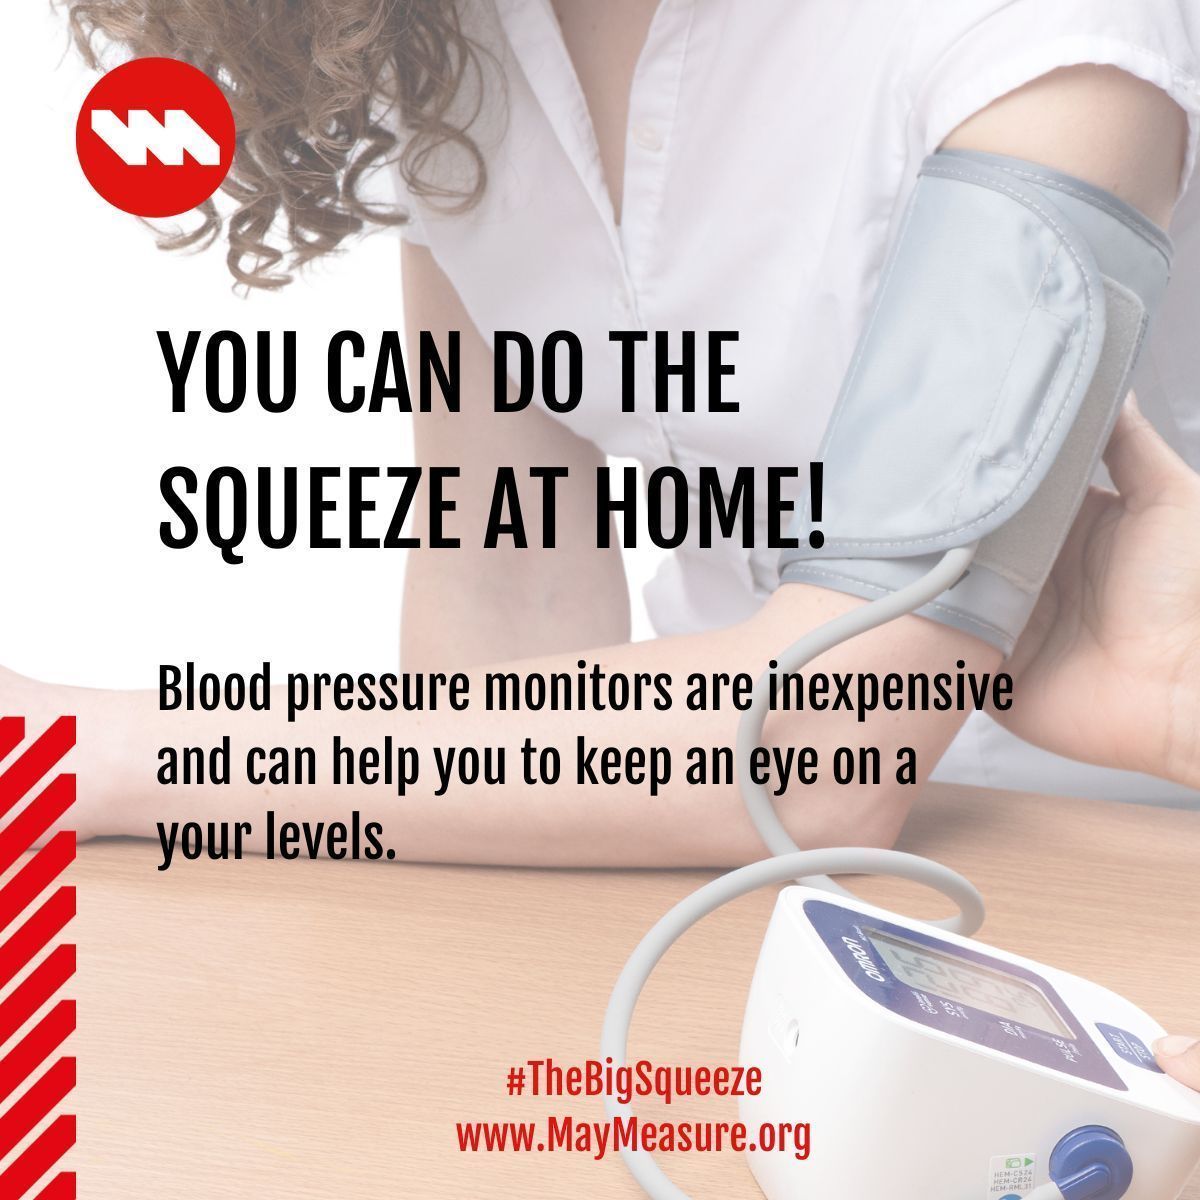 High blood pressure can cause health conditions like strokes & hear attacks.

Most people don't know they have it- but a simple check could identify it before it becomes a serious problem. 

Take part in the #BigSqueeze in May

More info from NHS HW here: bit.ly/3JN5eve